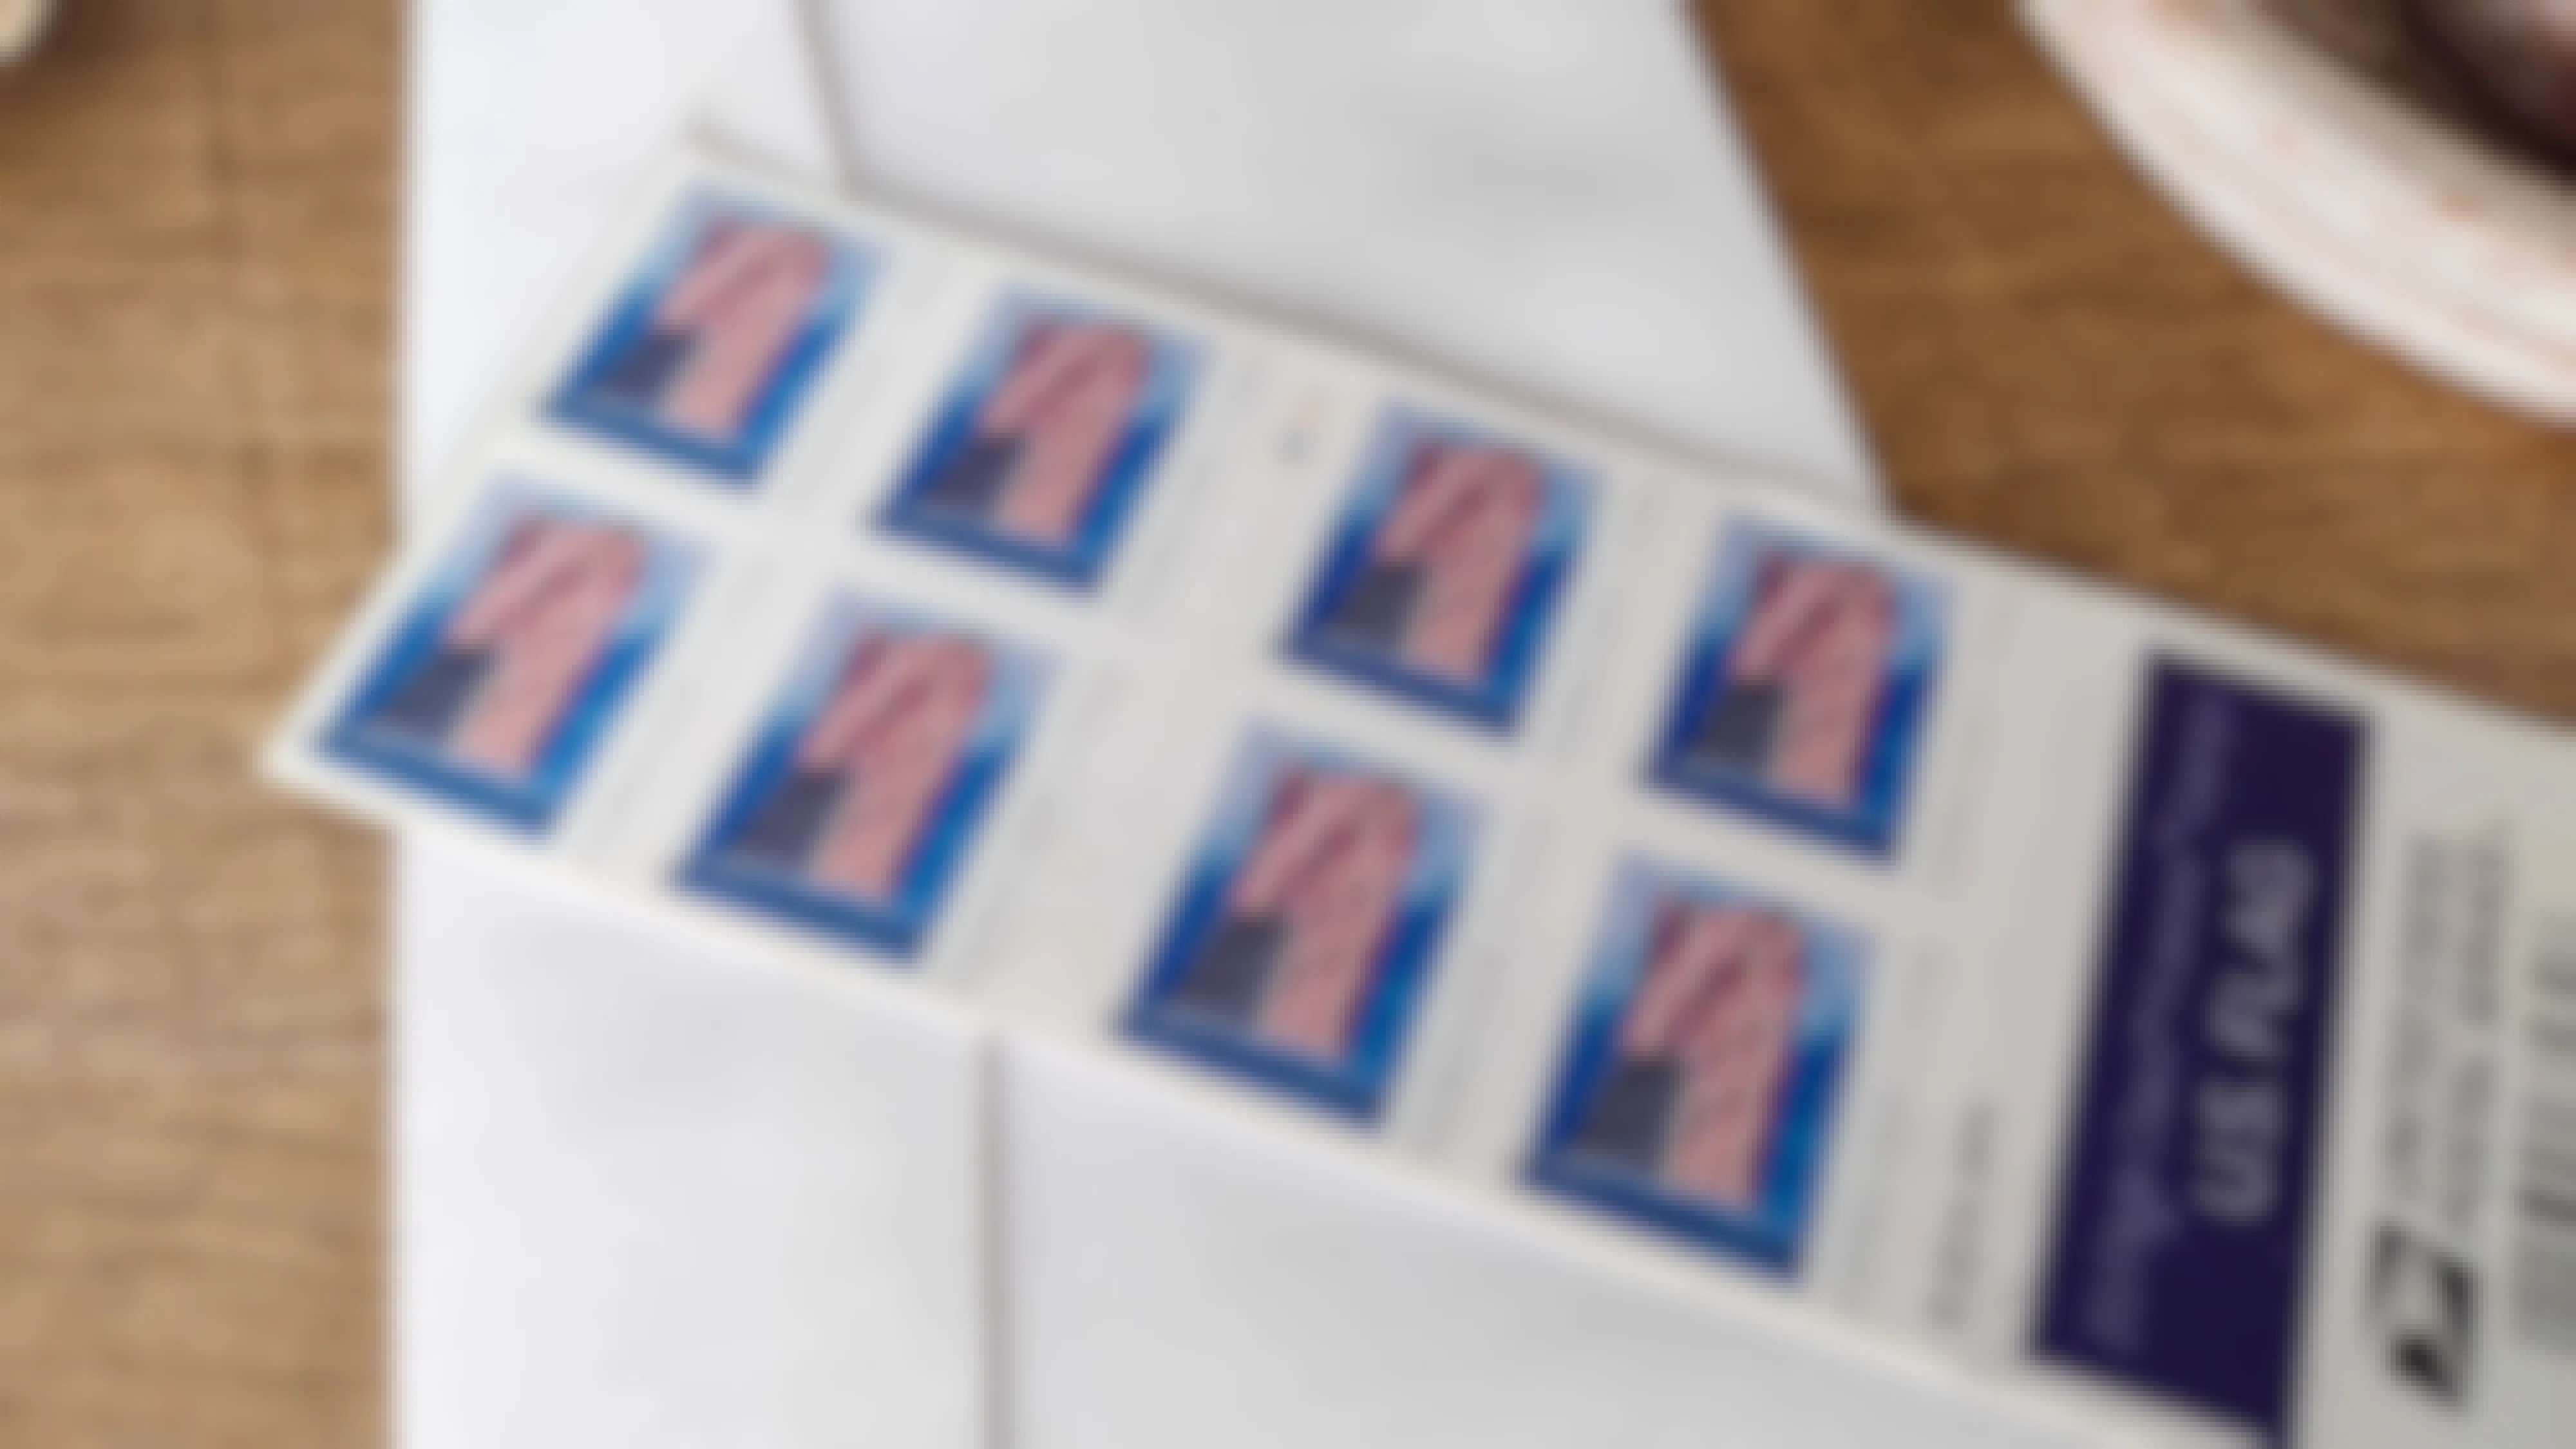 The Price of Stamps Is Going Up in July: What to Do Now